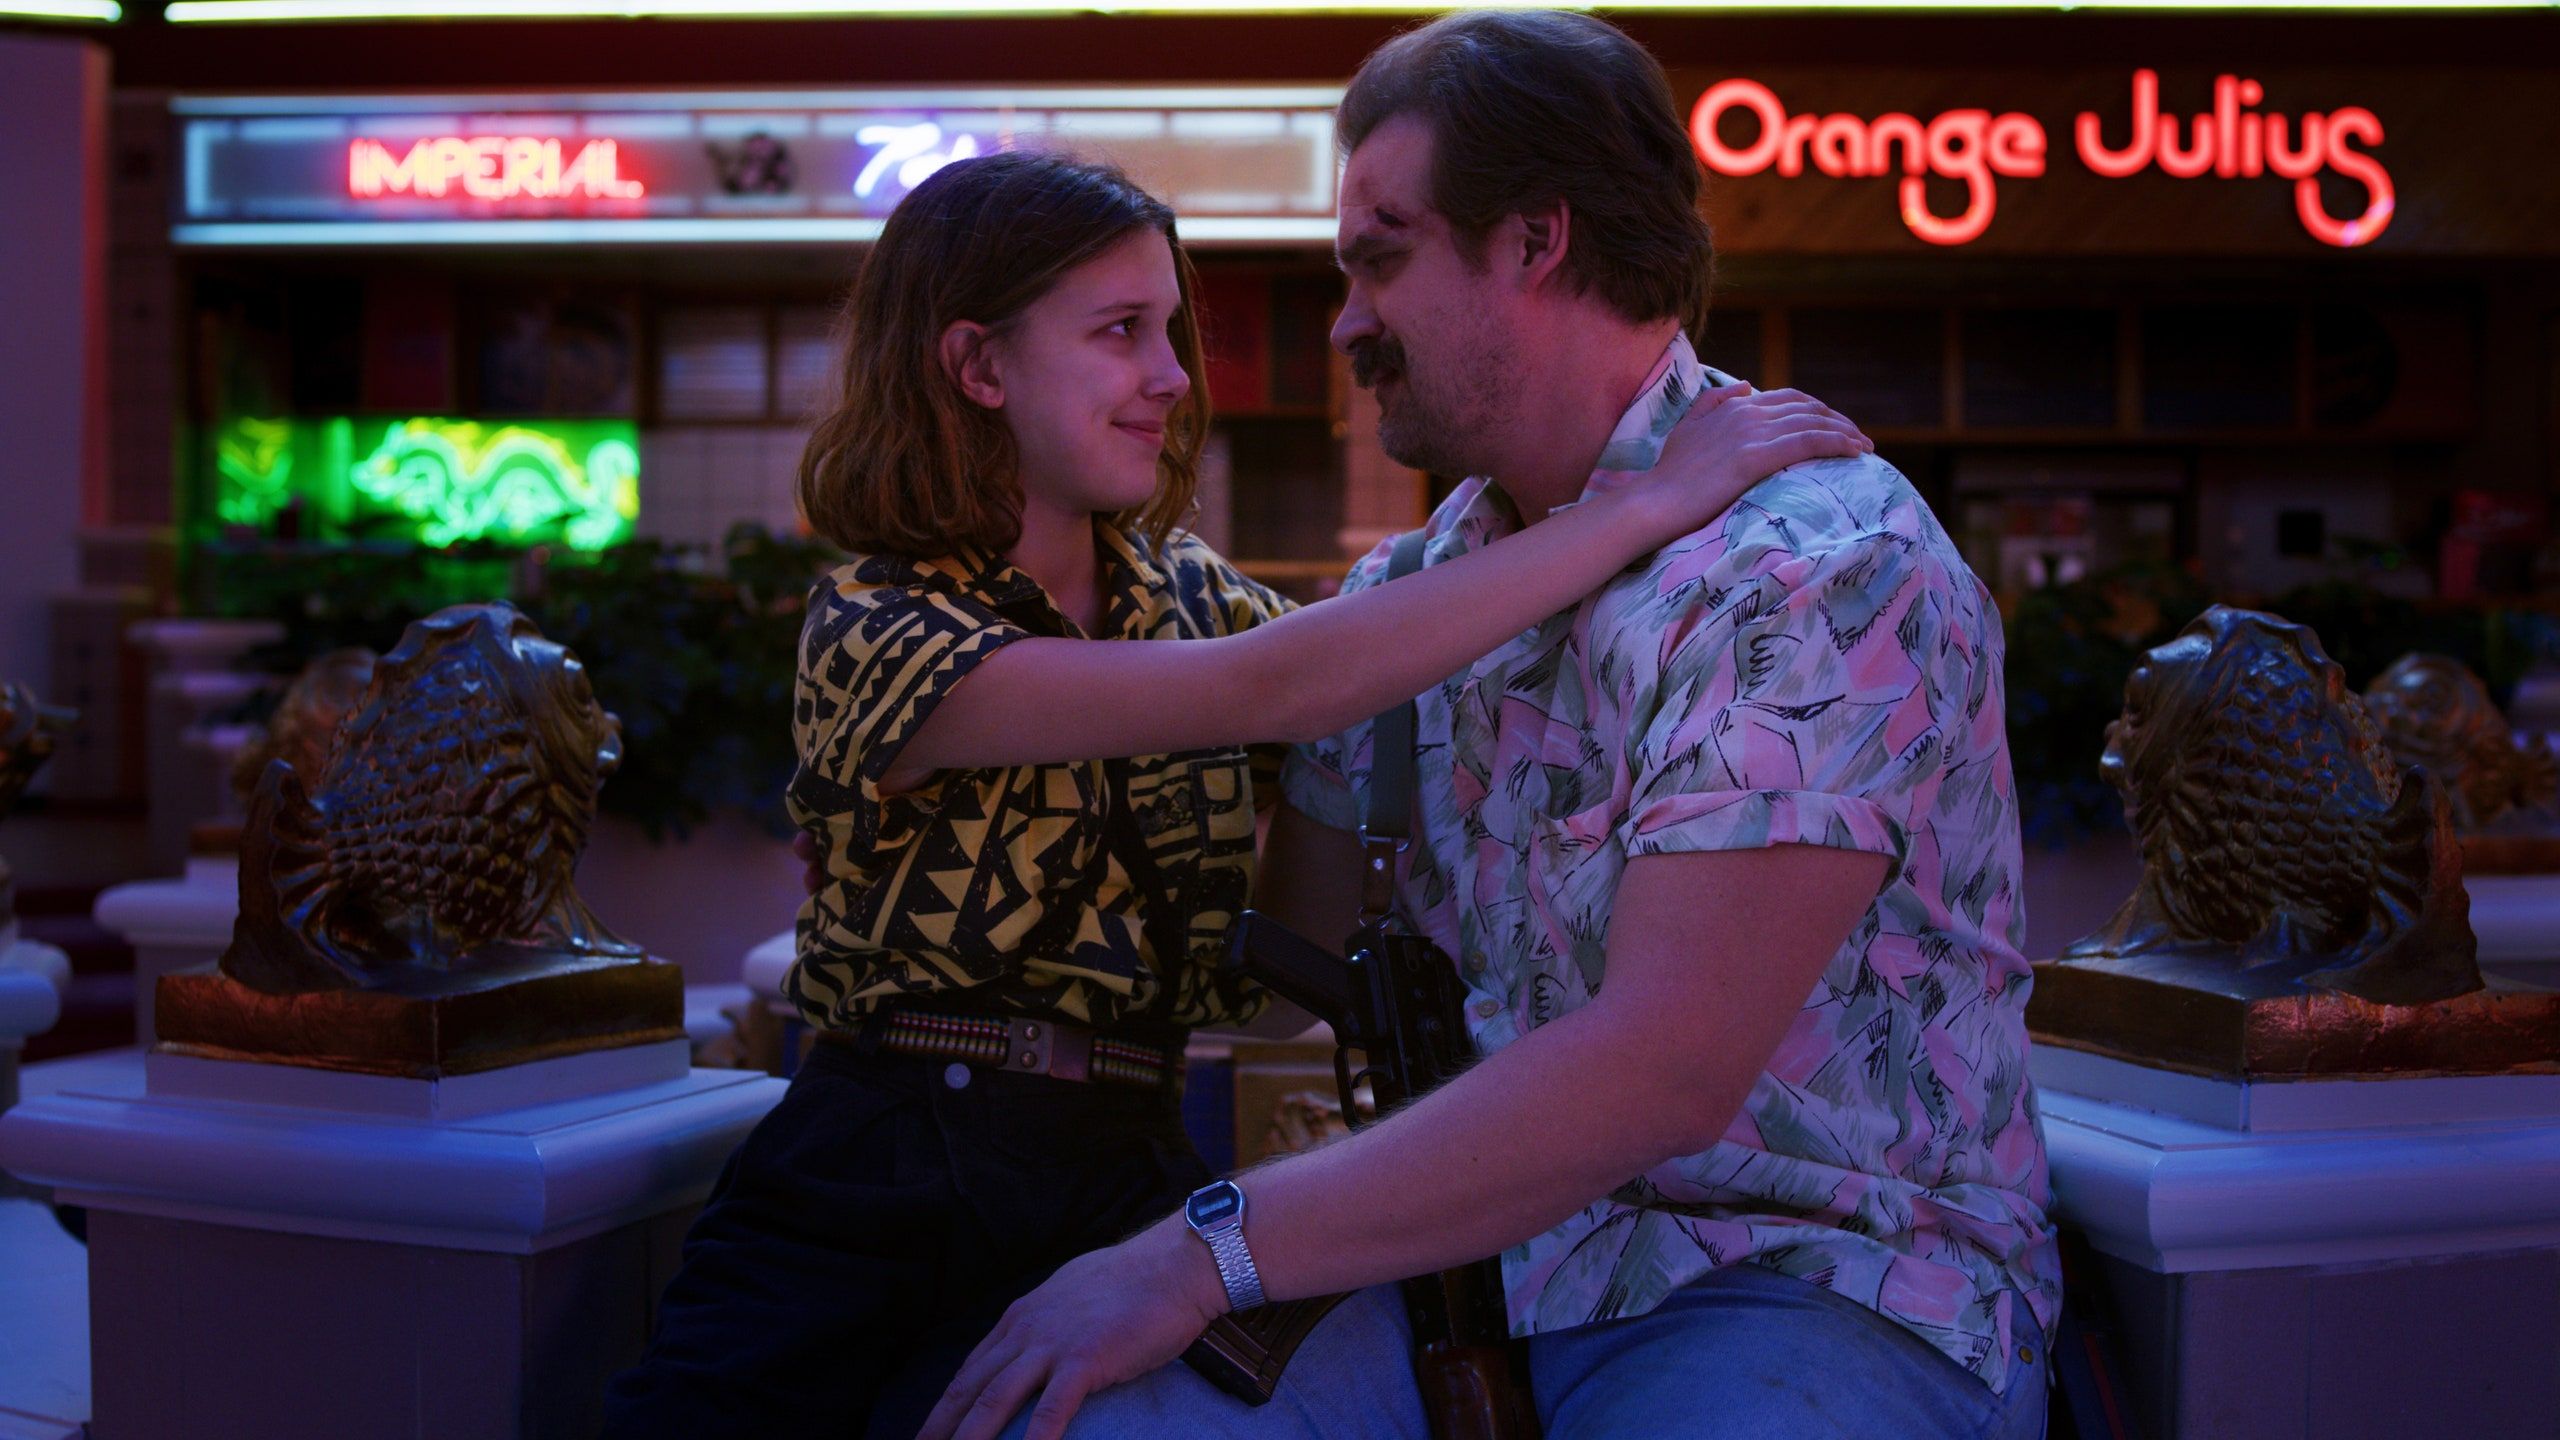 Stranger Things” Stars David Harbour and Millie Bobby Brown Talk Spoilers on IG Live